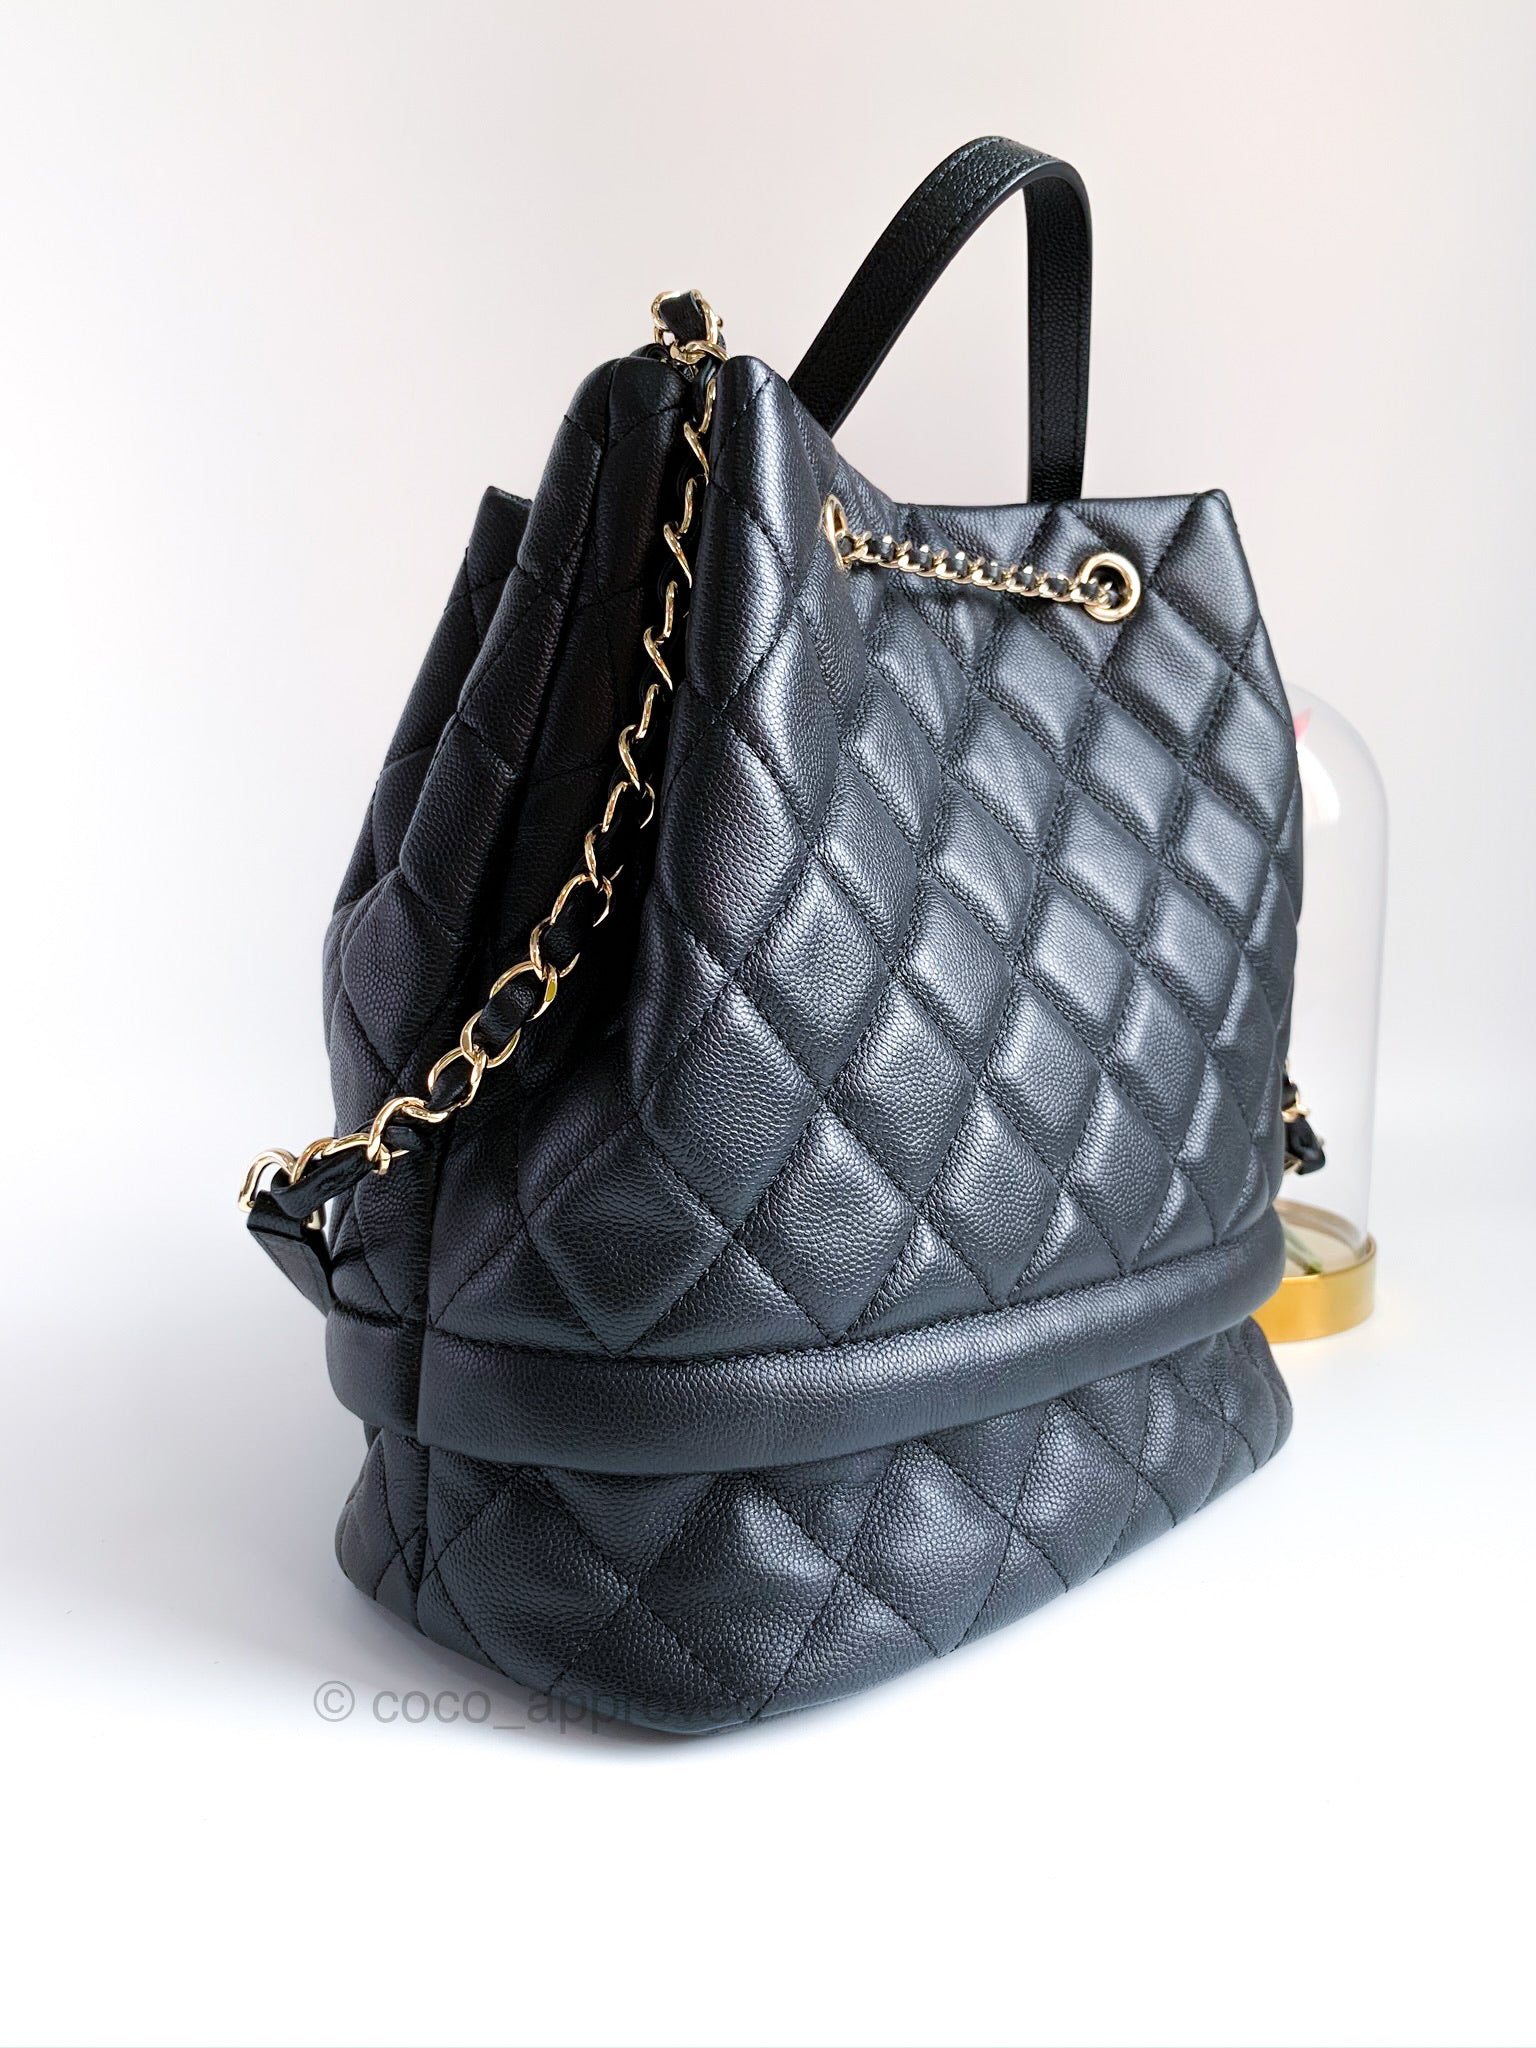 Chanel Caviar Quilted Rolled Up Bucket Drawstring Bag Black Gold Hardw – Coco  Approved Studio